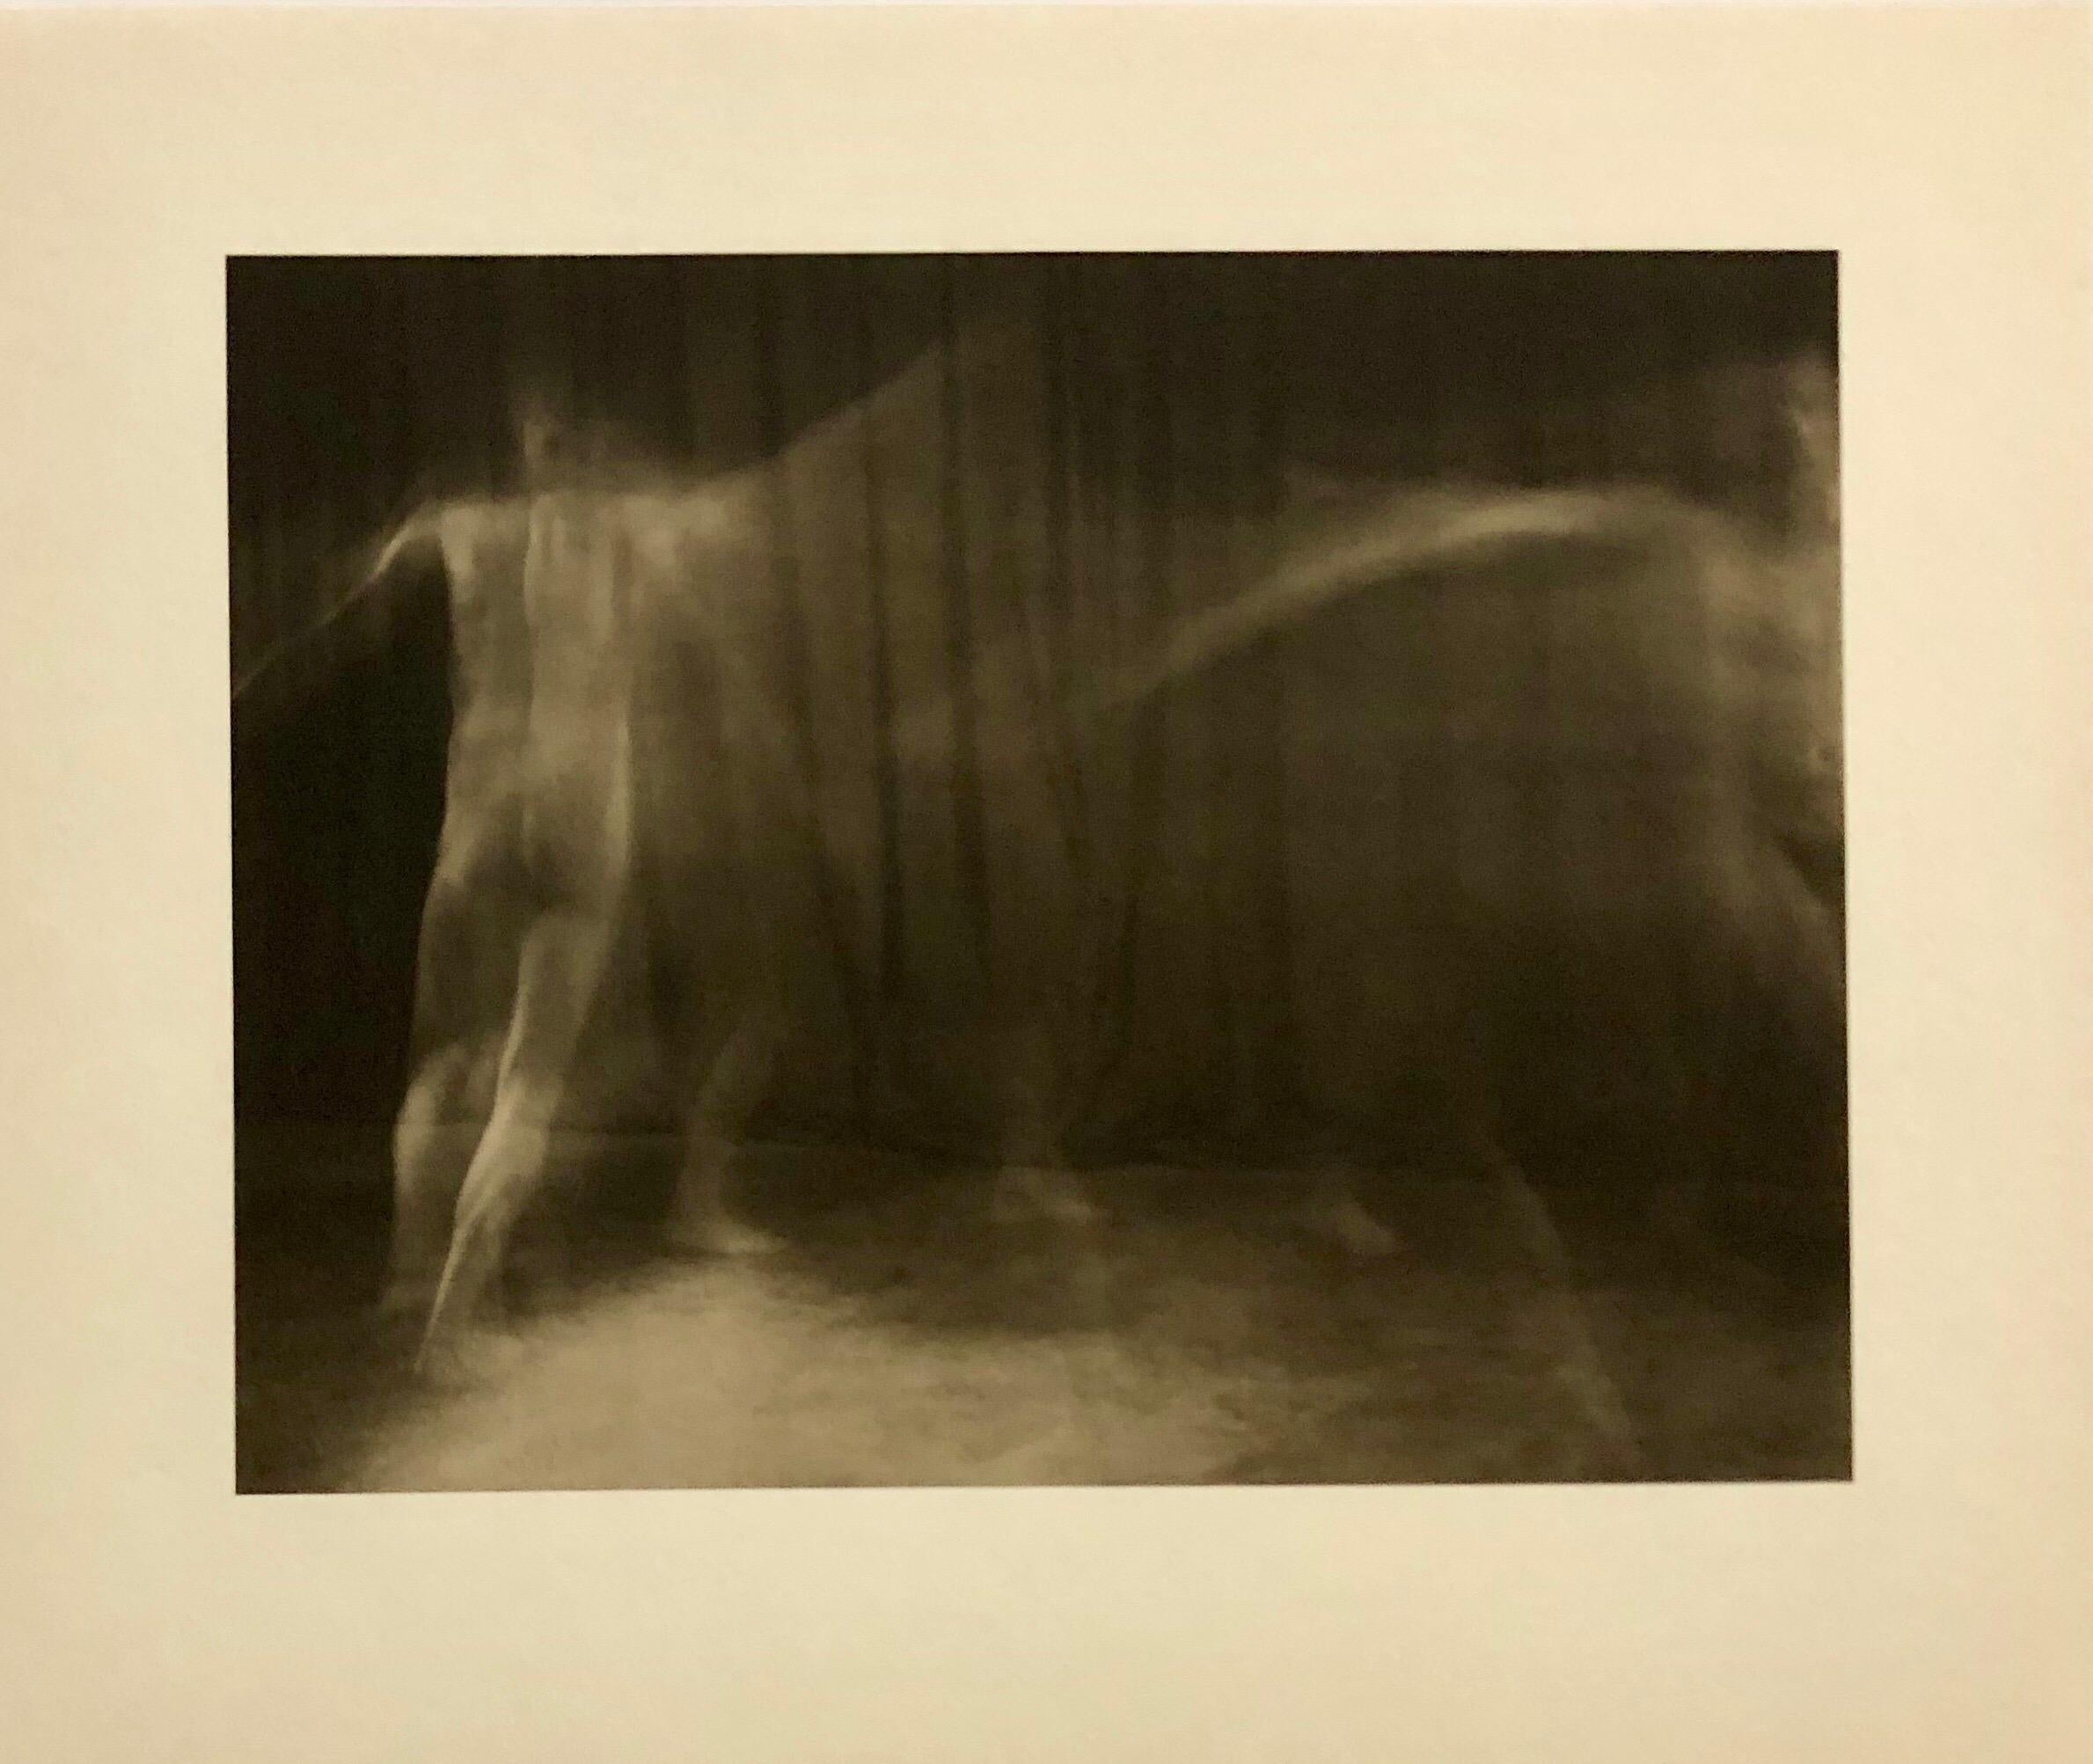 Skip Arnold Nude Photograph - Vintage Photograph Male Nude Platinum Print Photo 'Ring Around the Rosie' 